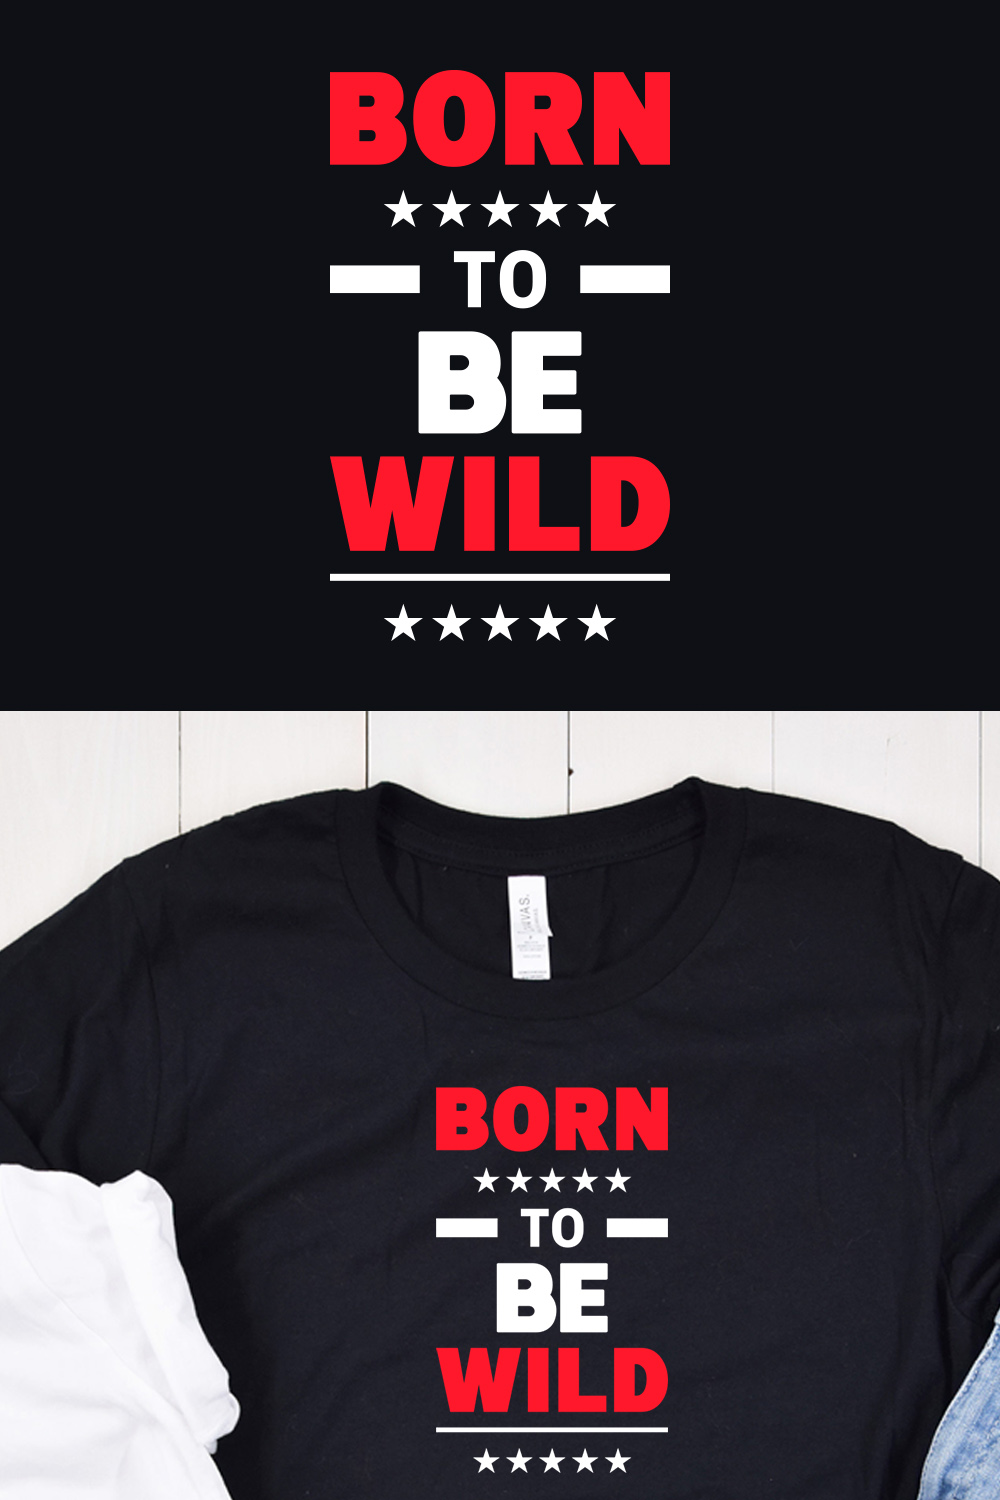 Born To Be Wild Typography T-shirt Design Pinterest collage image.